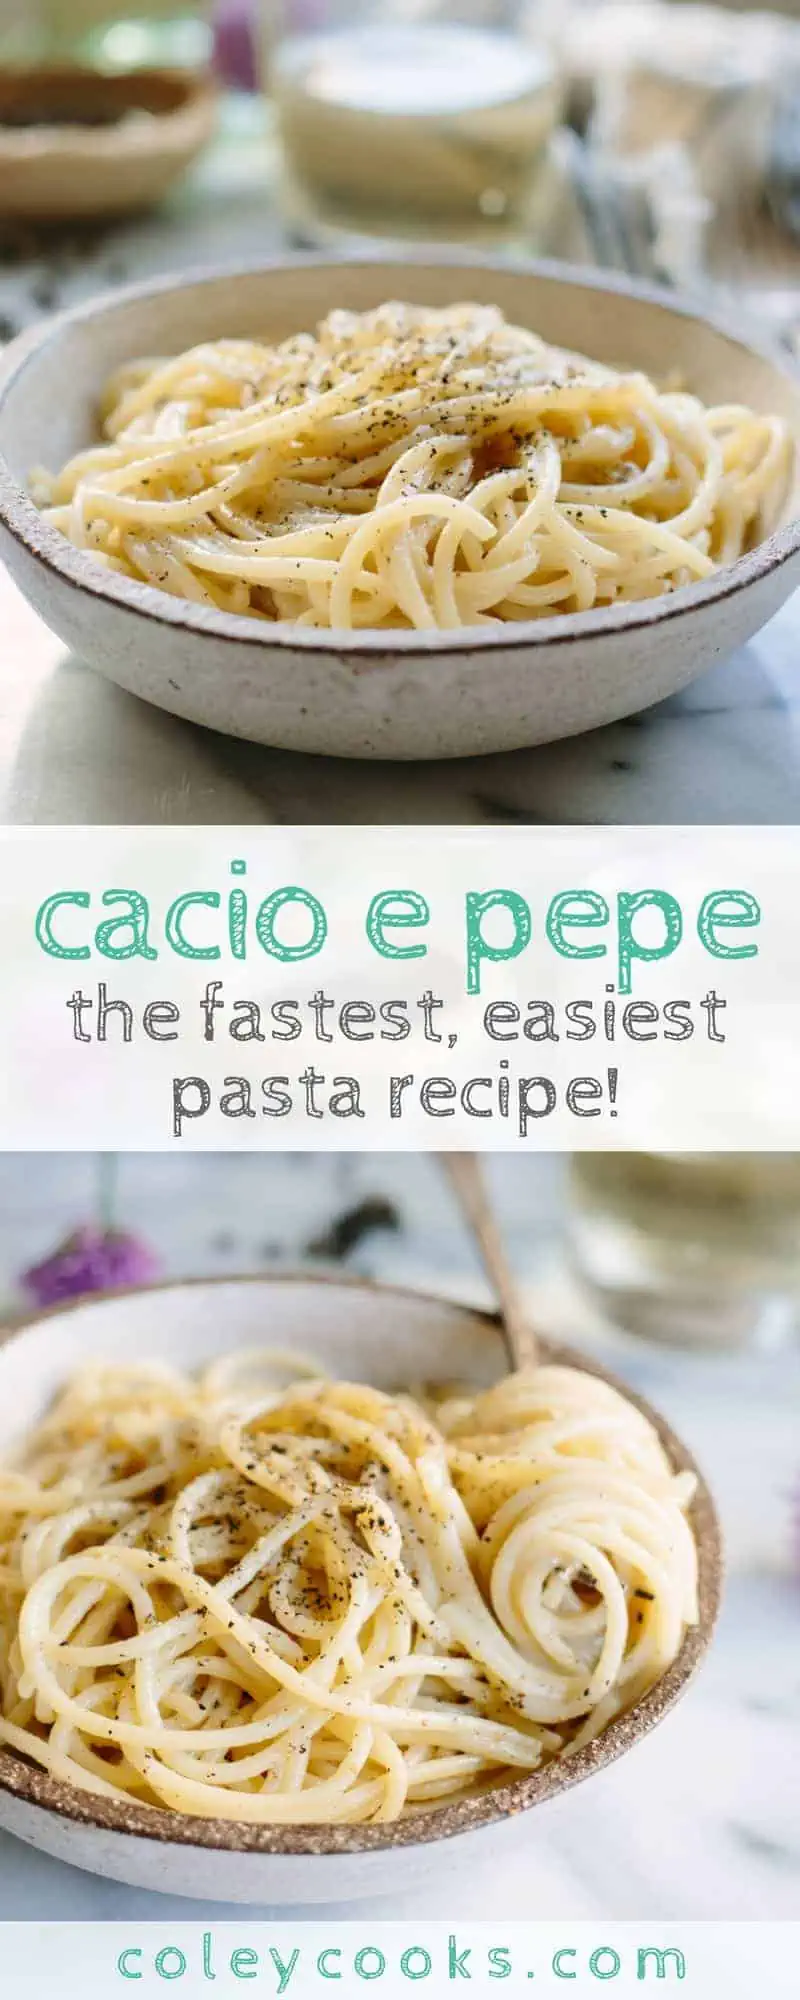 CACIO E PEPE | This simple classic Italian pasta recipe is the best quick and easy weeknight dinner! Comes together in minutes and tastes amazing. Only 5 ingredients! | ColeyCooks.com